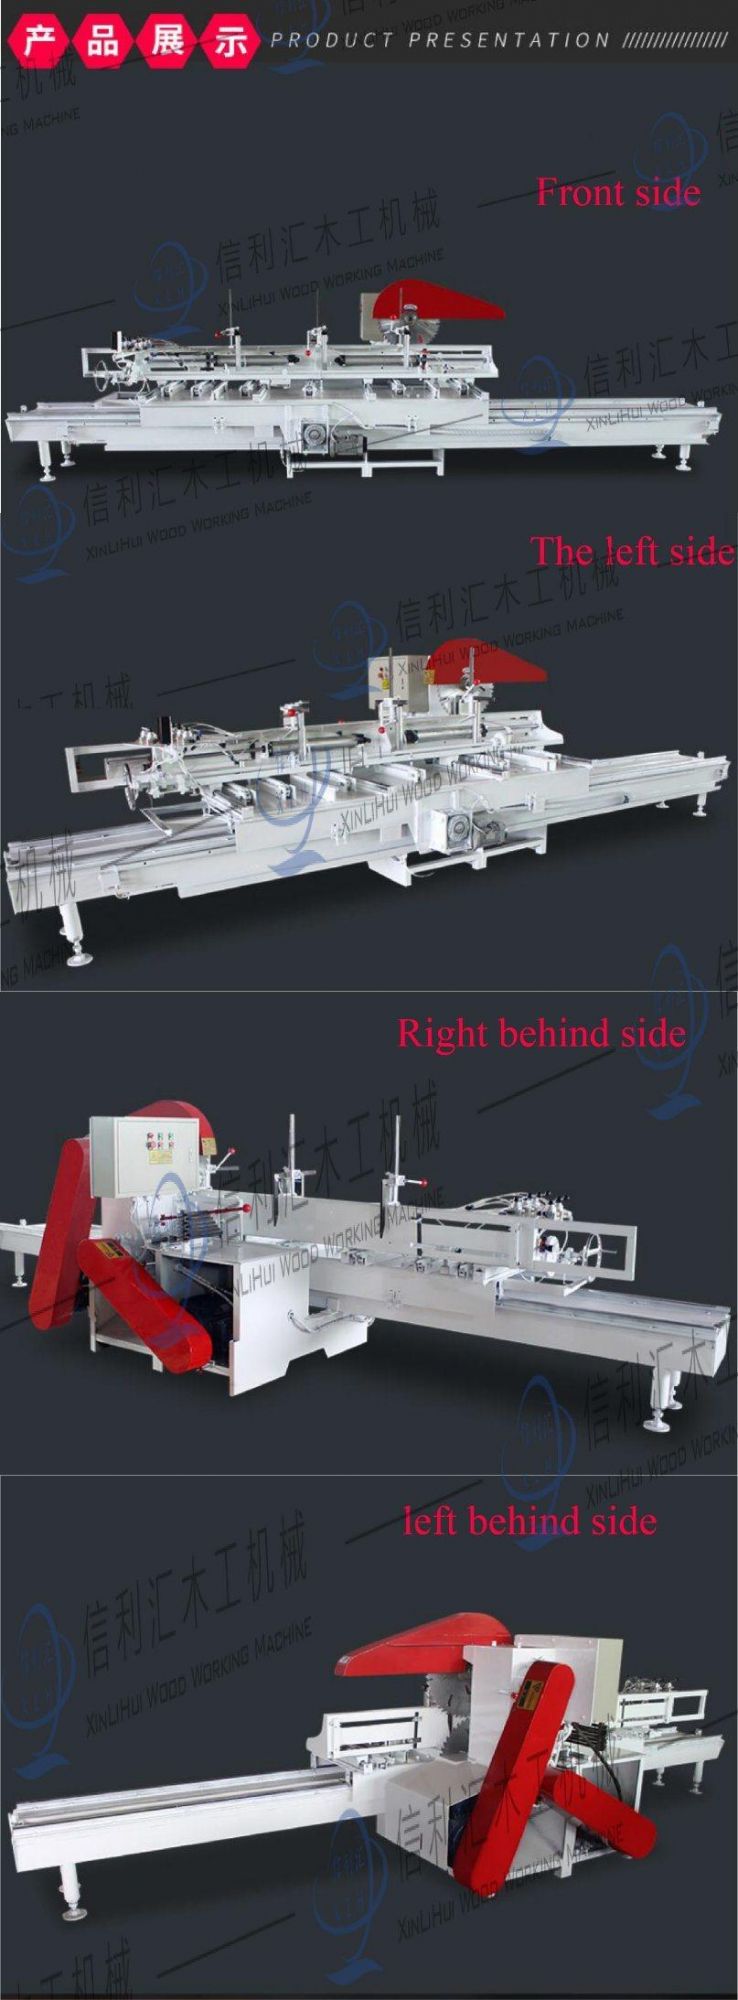 New Semi-Automatic Large Log Push Table Saw Woodworking Machine Log Push Table Saw Mechanical Equipment Feeding Strong Febrication Machineries,